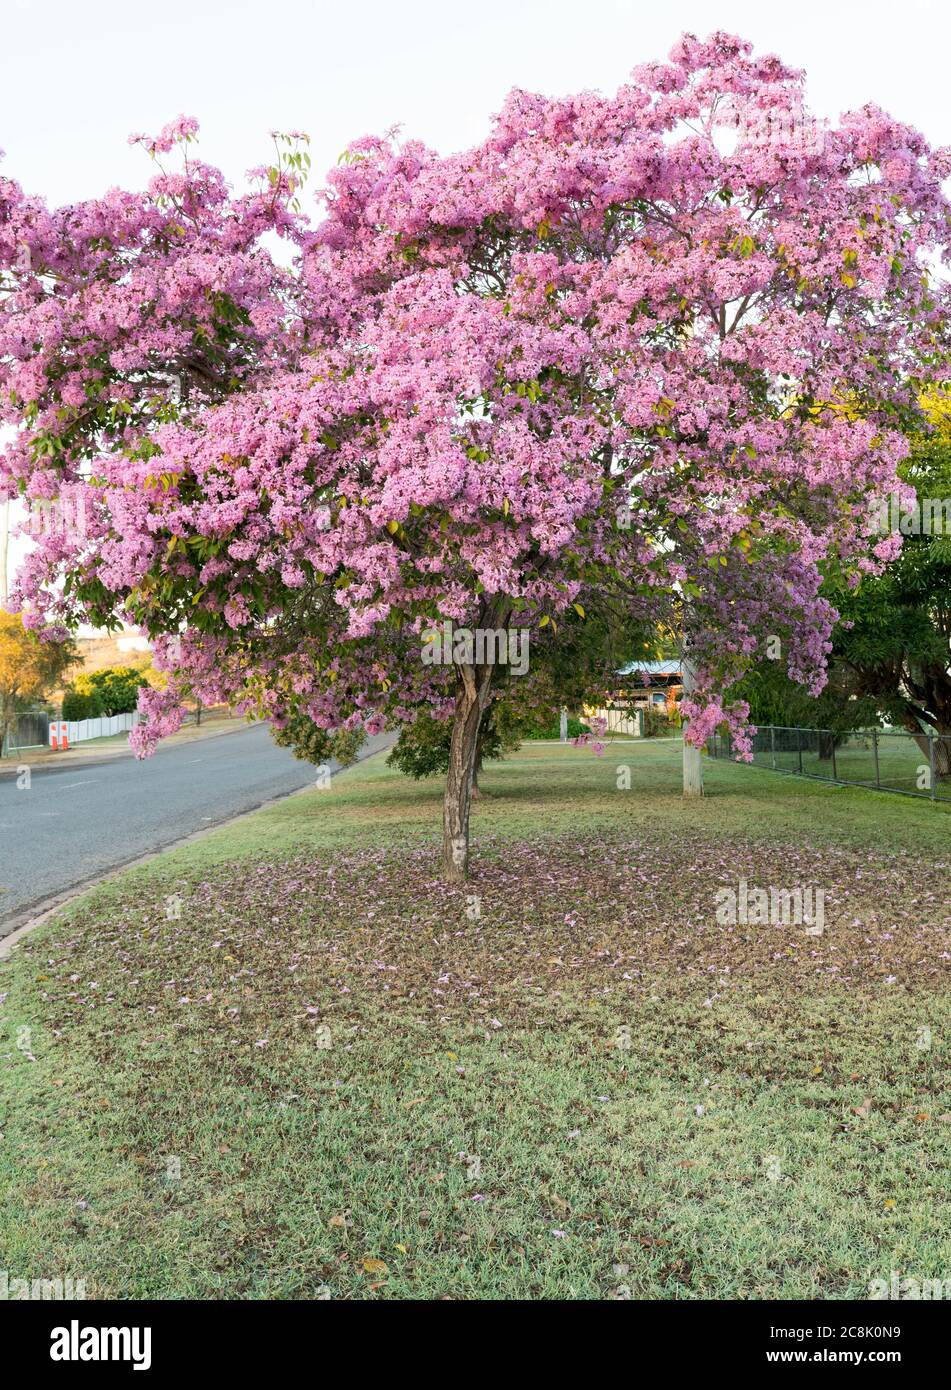 Flowering Tabebuia palmeri or Handroanthus impetiginosus covered in pink bell shaped flowers Stock Photo